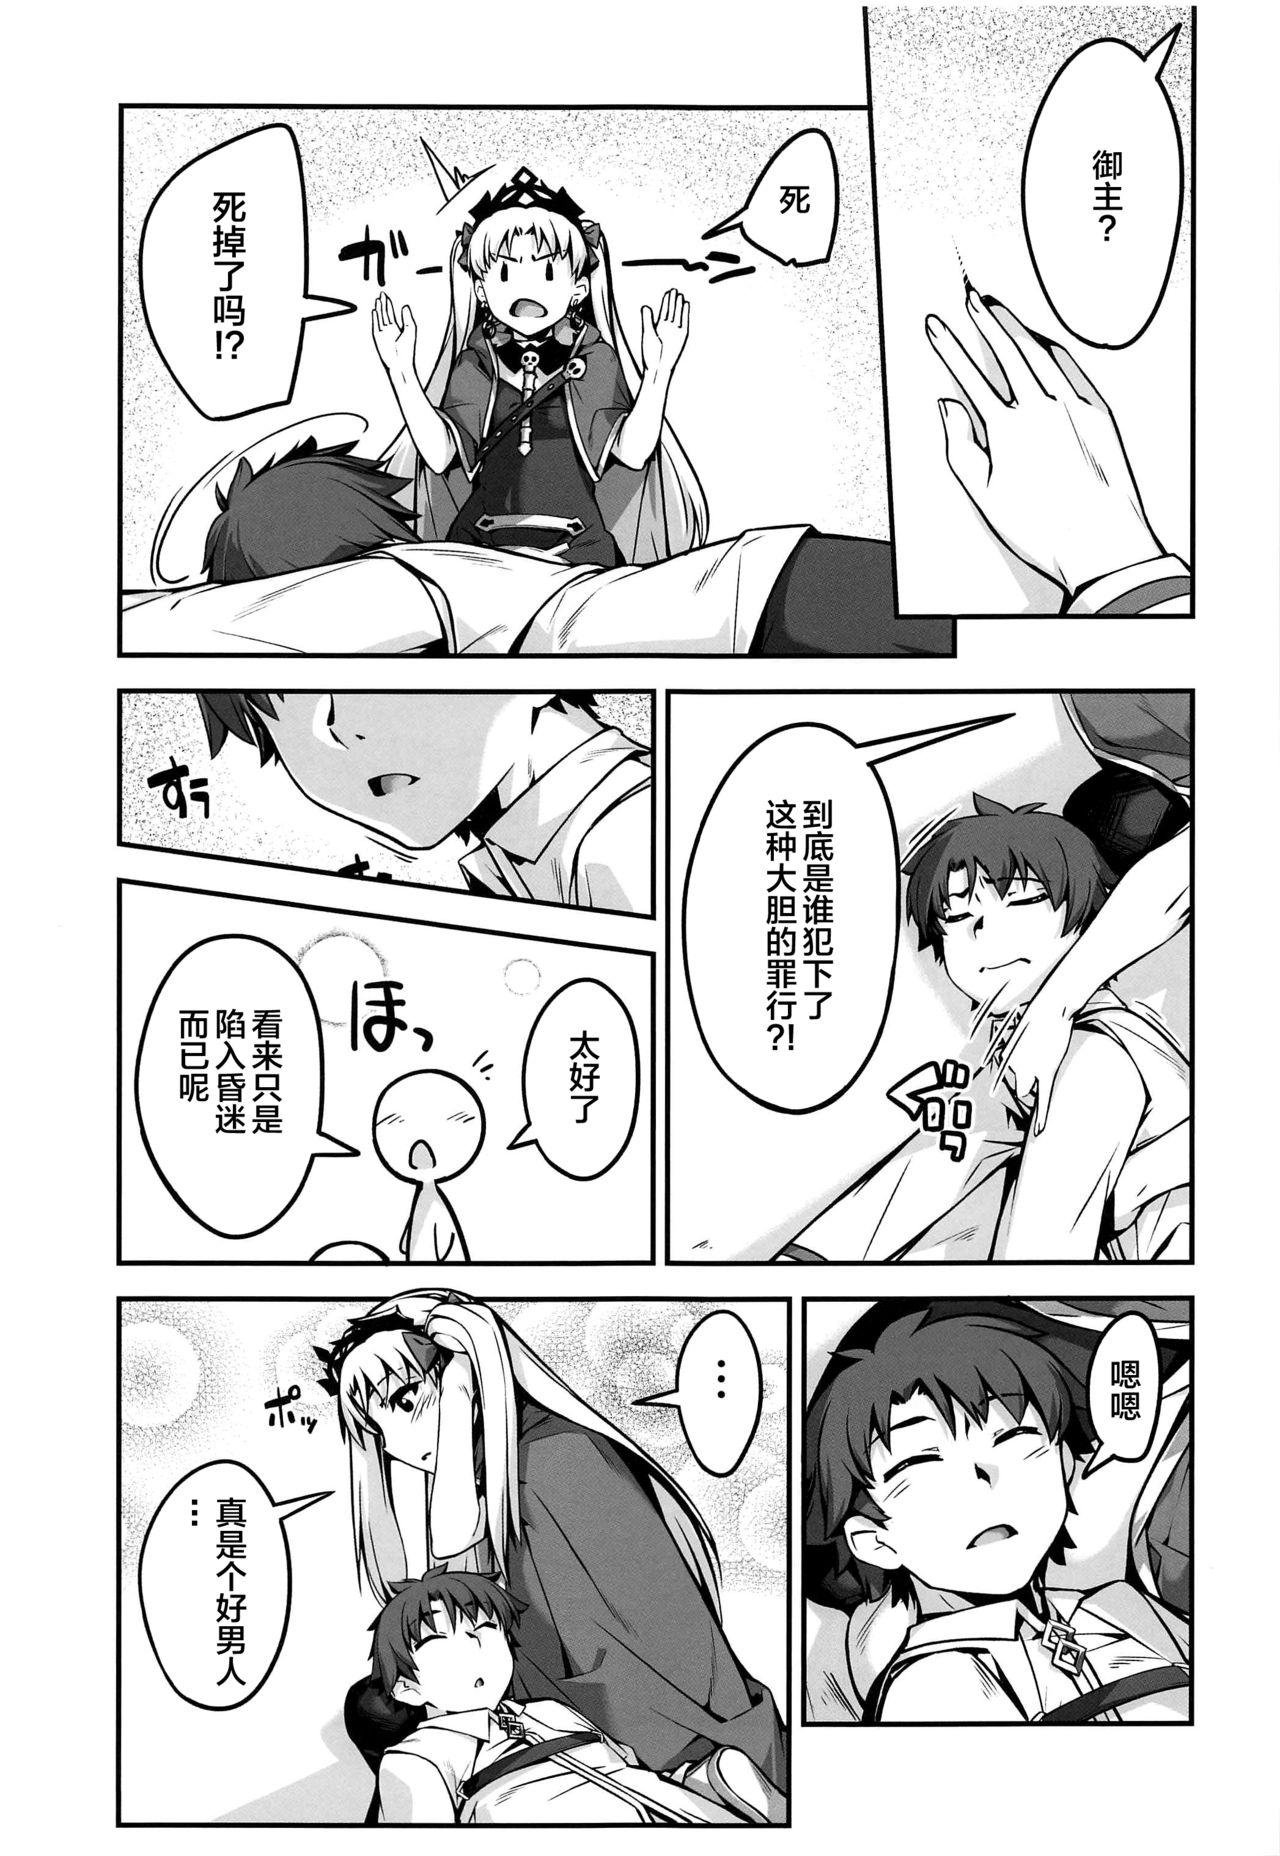 Fucked Hard Hiroigui. - Fate grand order Passion - Page 4